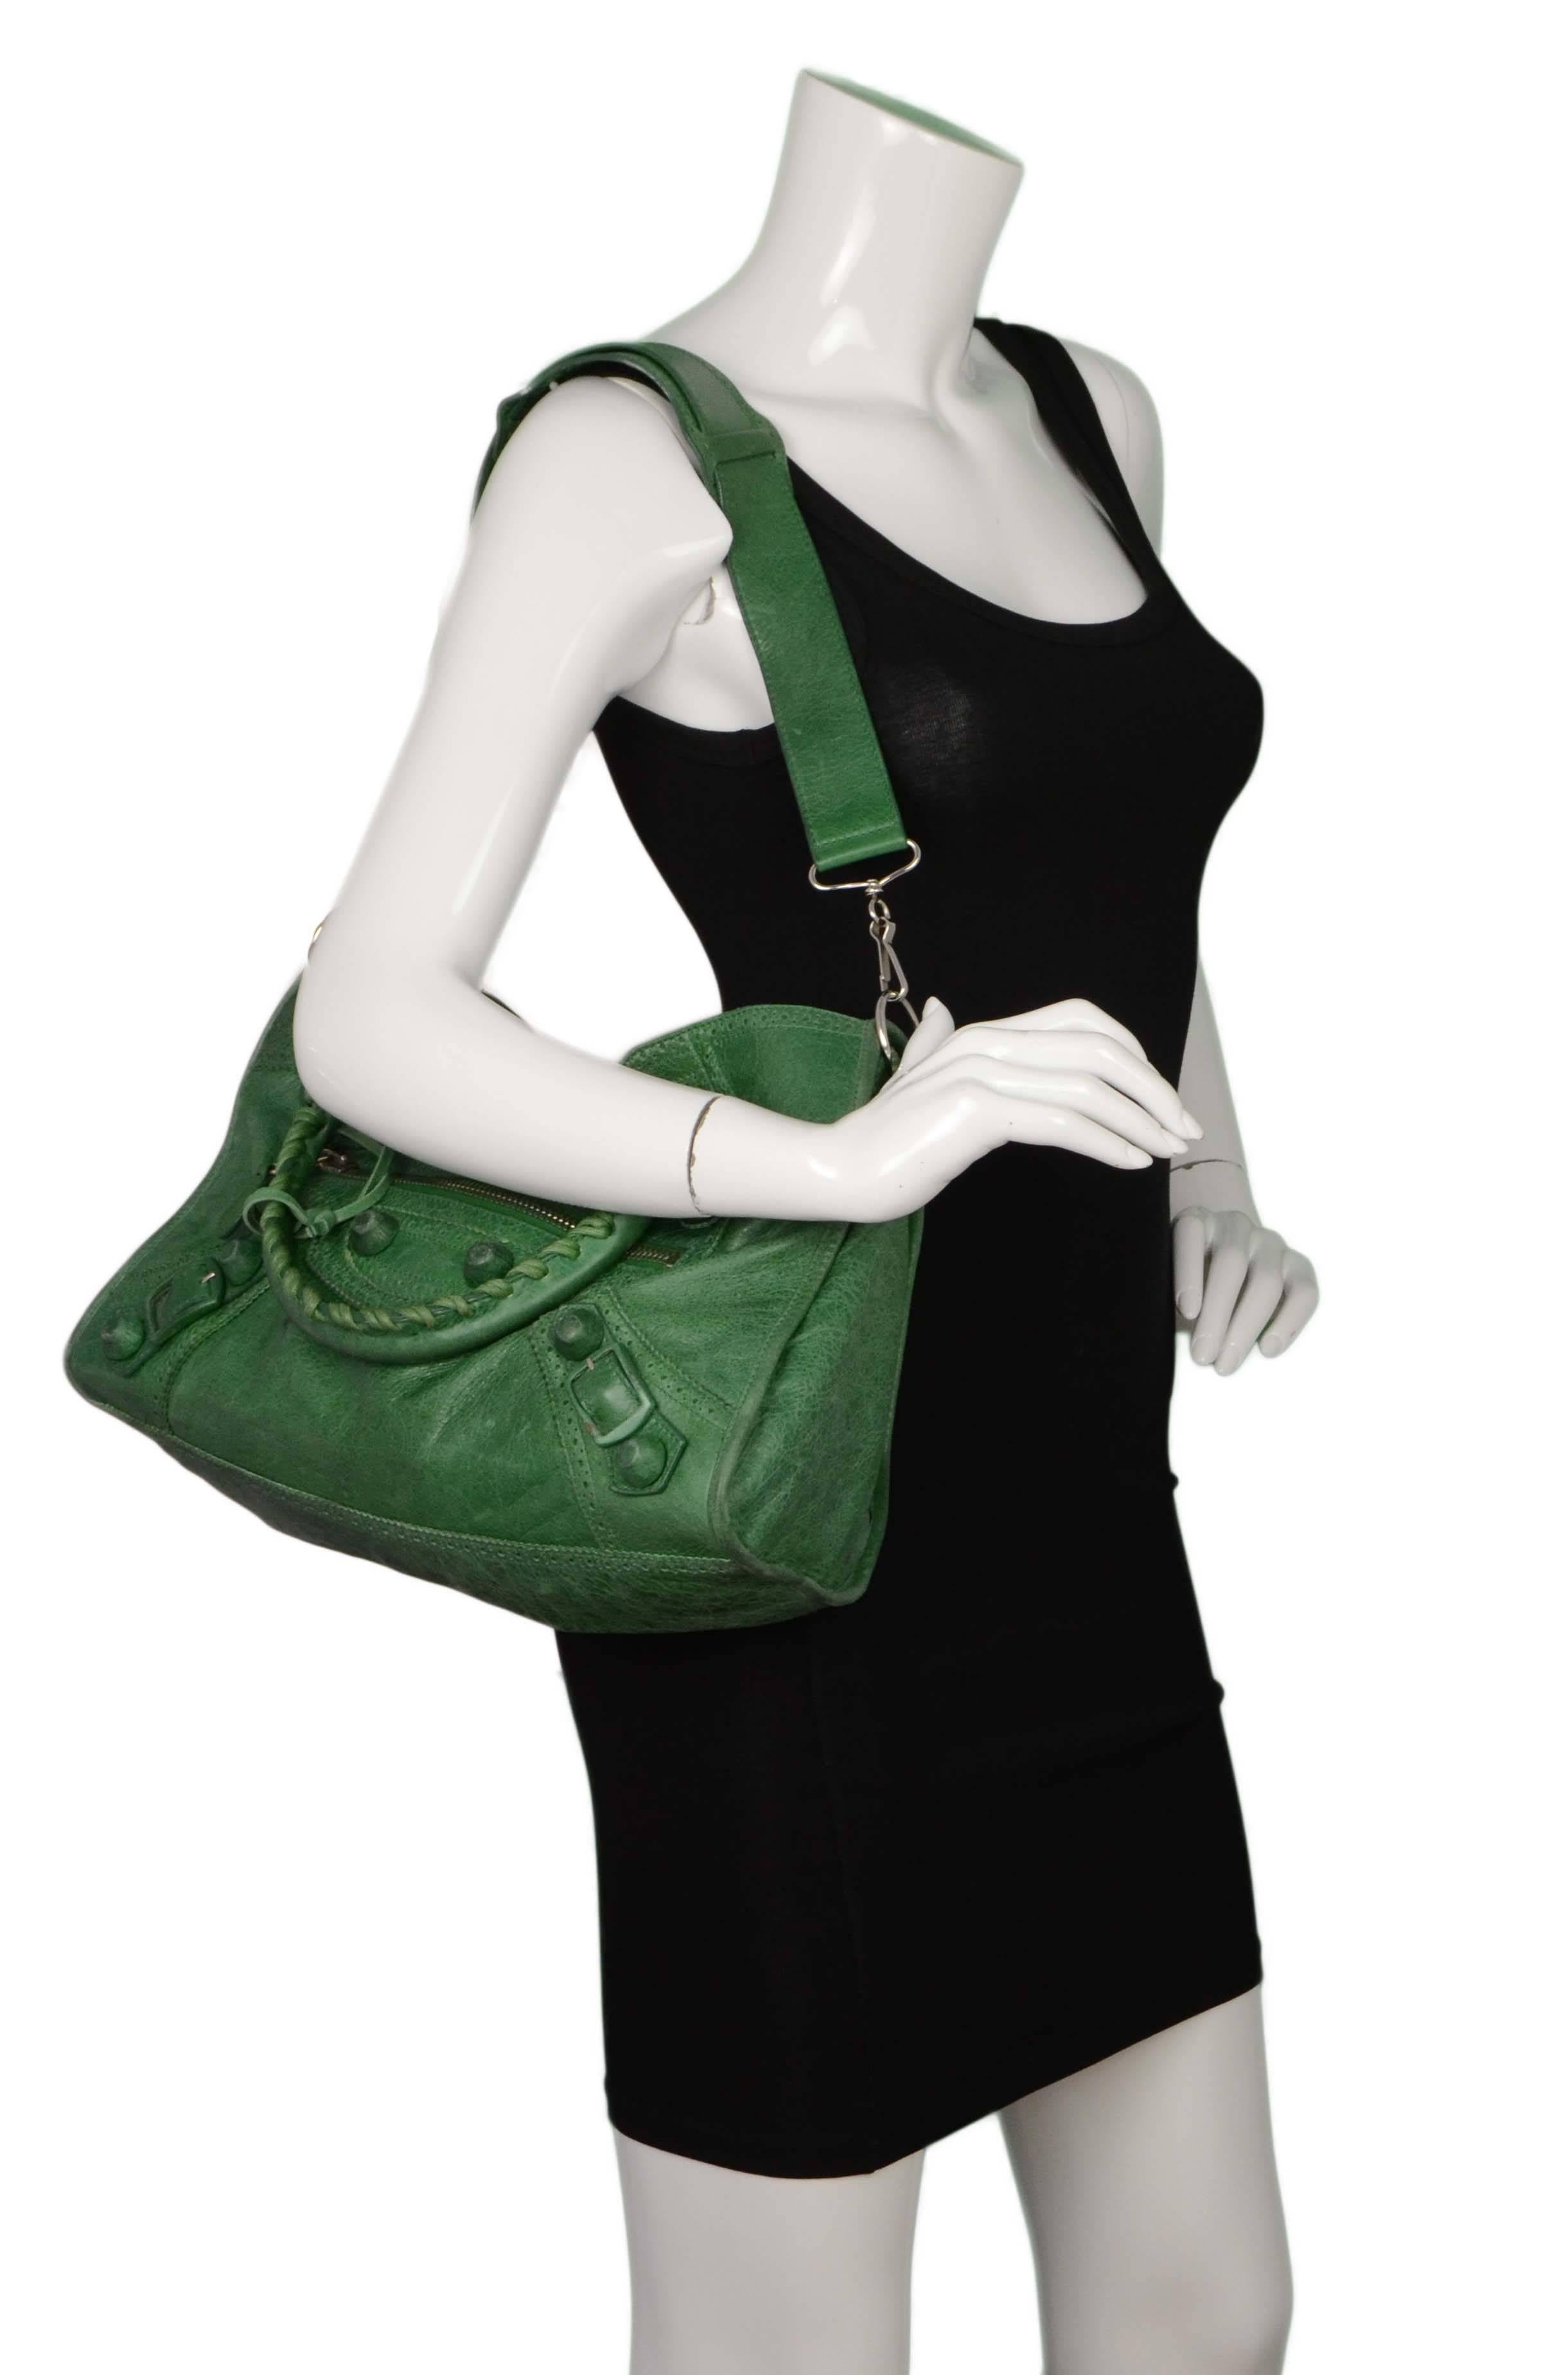 Balenciaga Green Leather Giant Brogues Covered Motorcycle City Bag rt. $2, 045 2